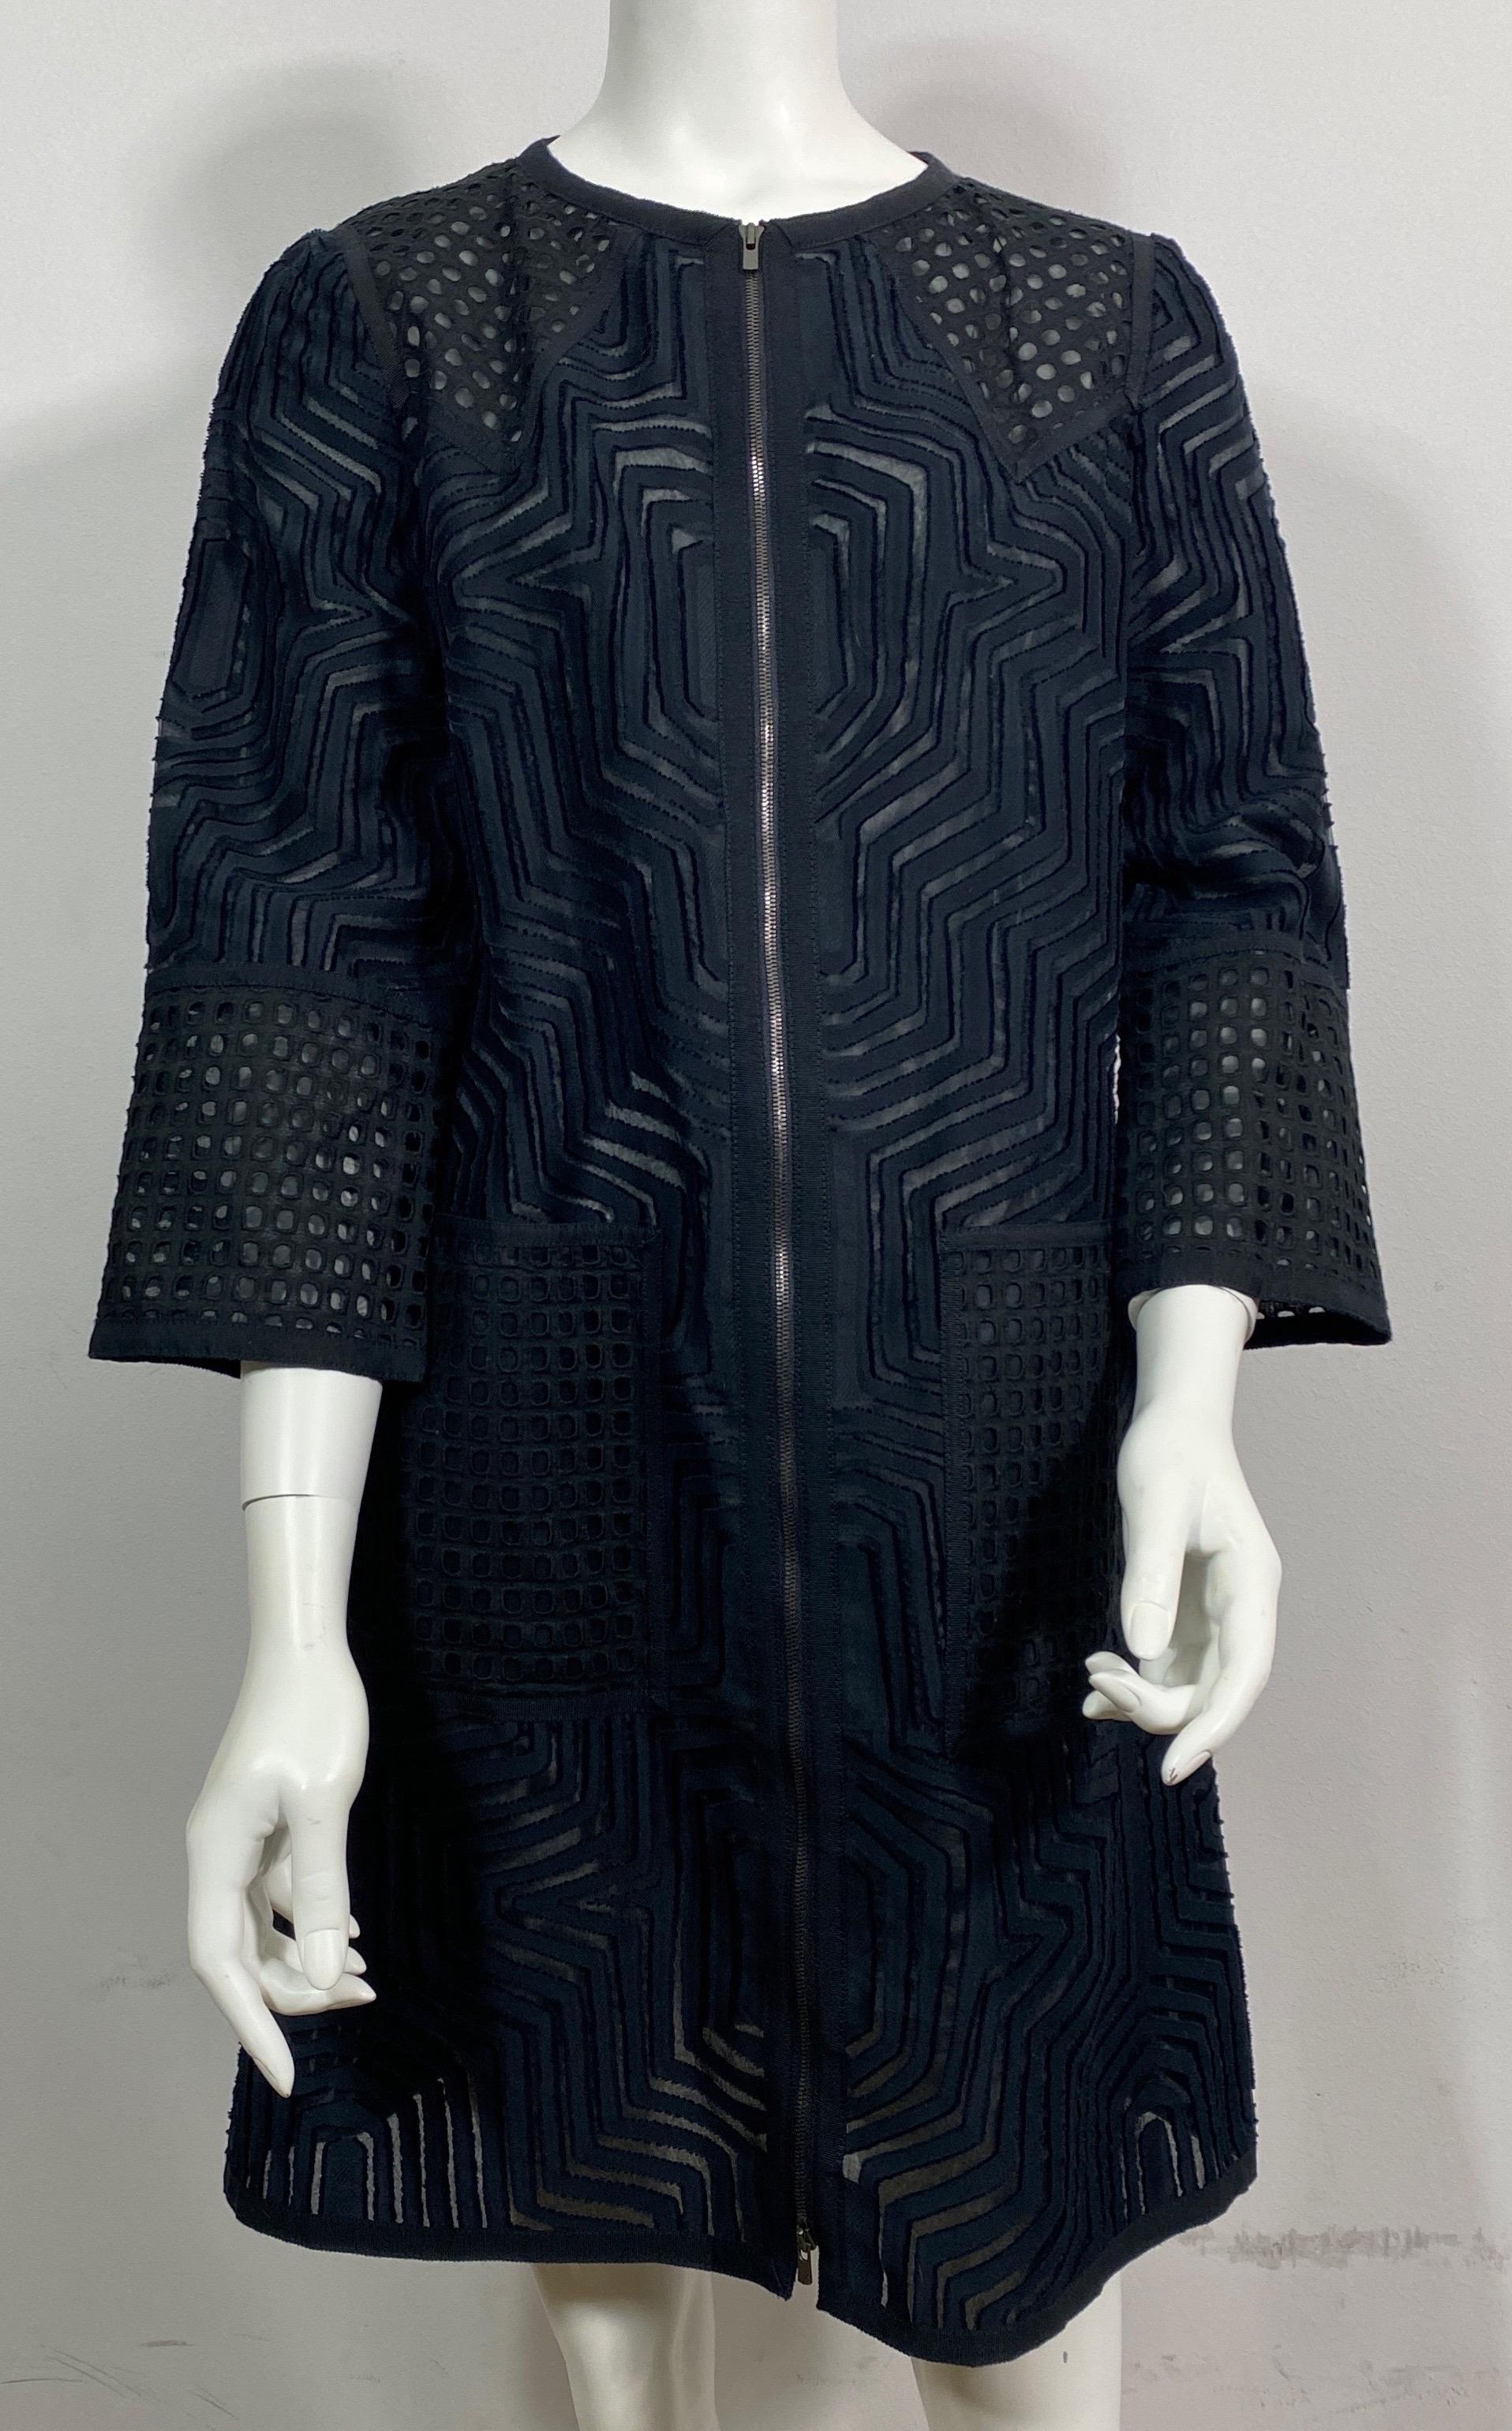 Andrew GN Black Cotton Lace Zip Coat Dress - Size 40  The Spring 2014 collection black cotton geometric patterned lace front zip coat can be worn as a dress as well and is semi transparent which is all the style right now. The garment has a multi